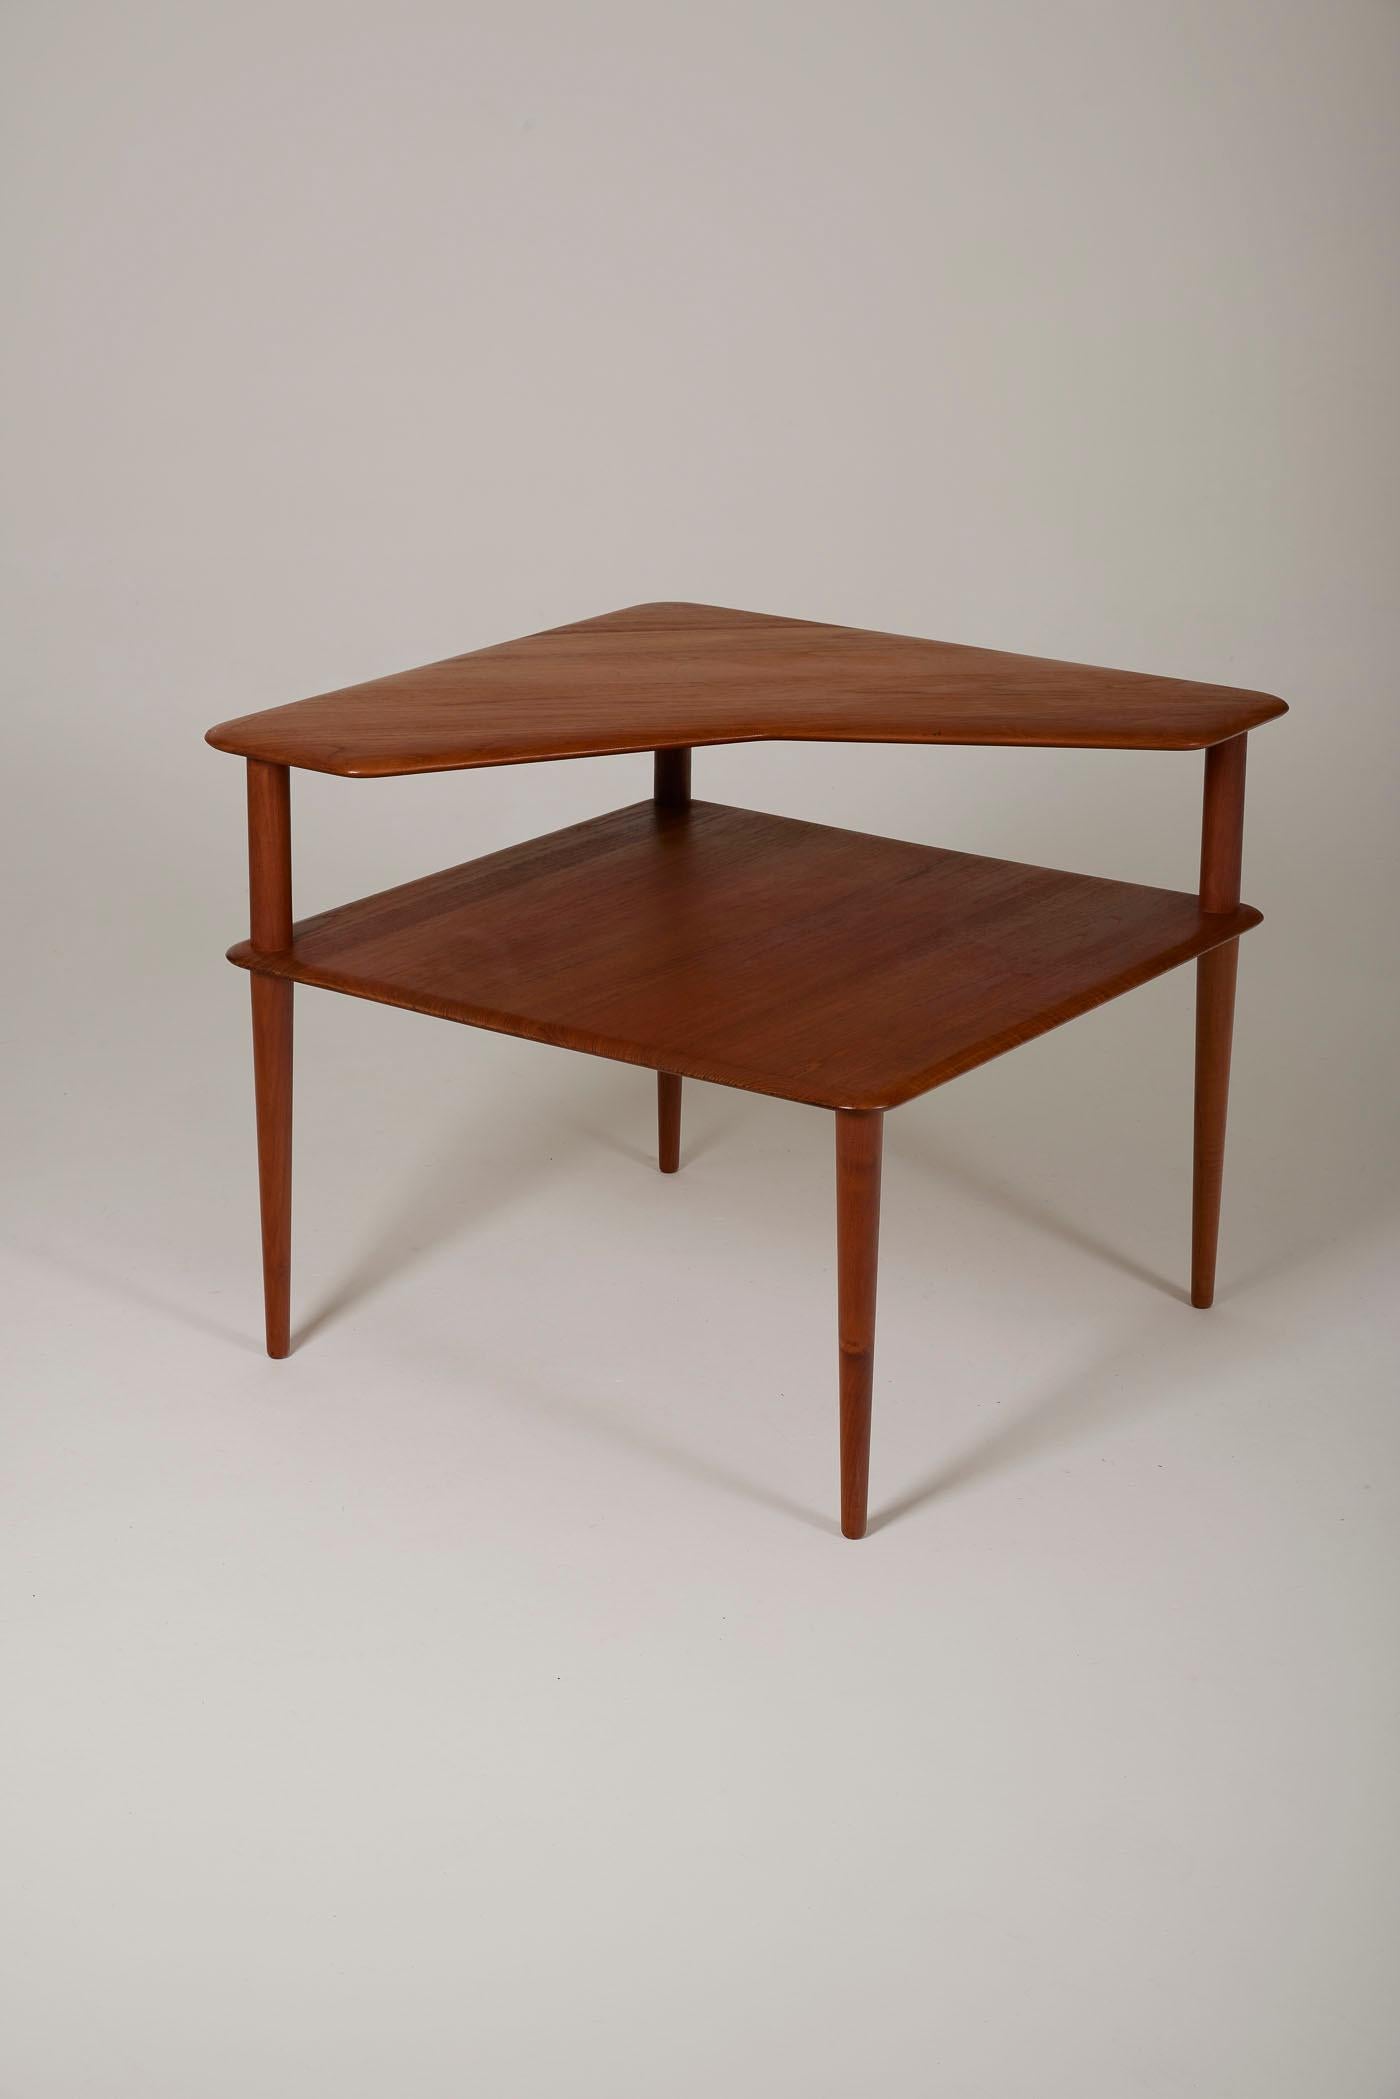 Table by designers Peter Hvidt & Orla Molgaard Nielsen for France & Søn, 1960s. It has two teak tops, one of which is asymmetrical. Ideal as a side table or occasional table at the corner of the sofa. In perfect condition.
DV452